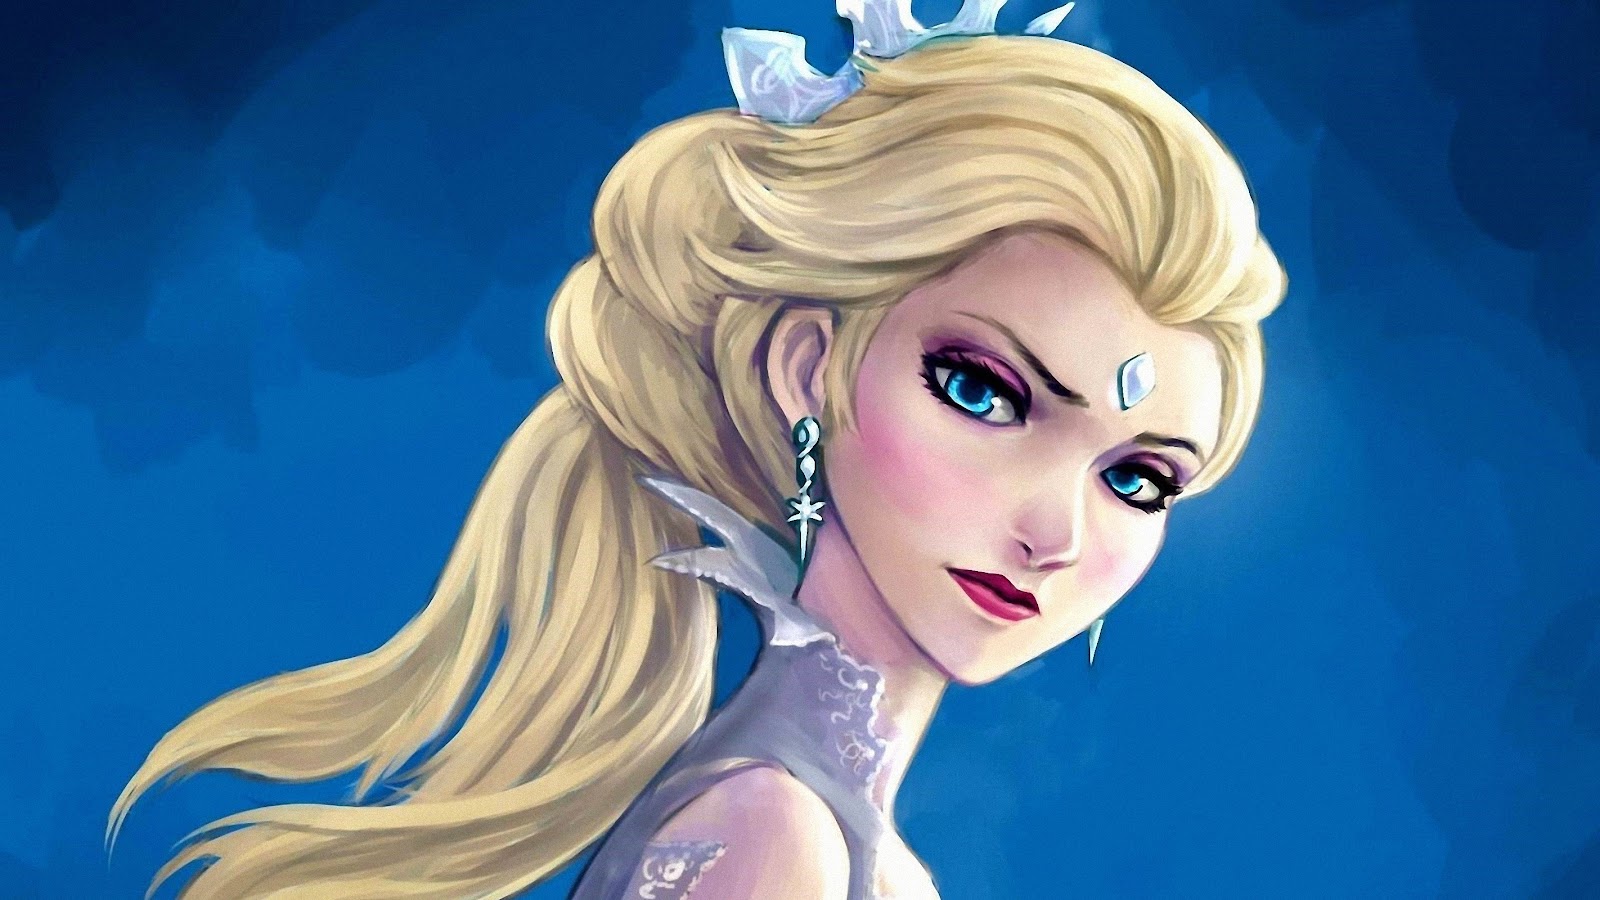 Creating a picture of Elsa 